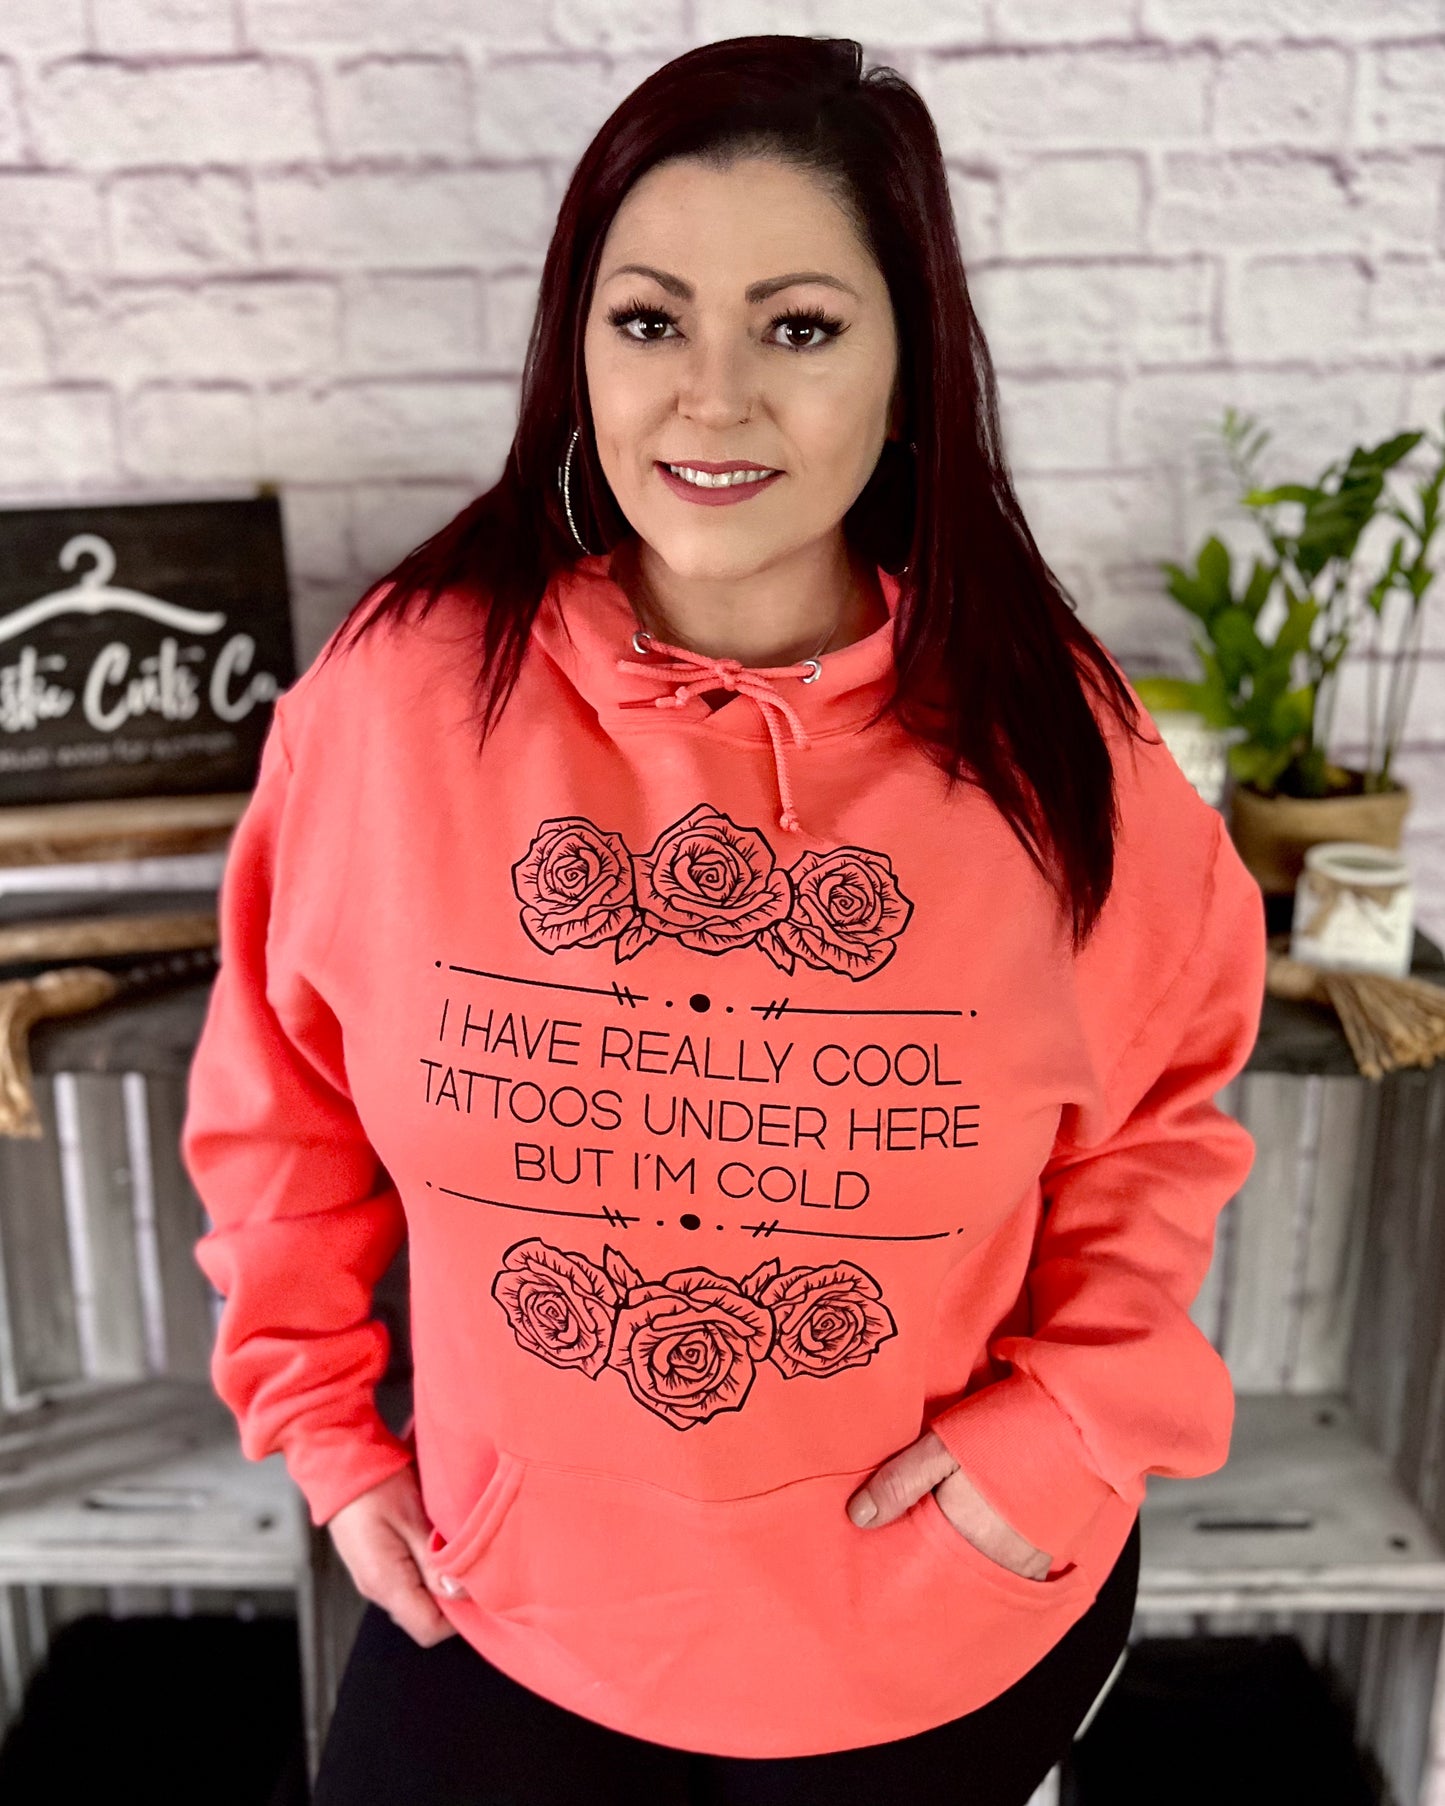 I have really cool tattoos under here but I'm cold | hooded sweatshirt